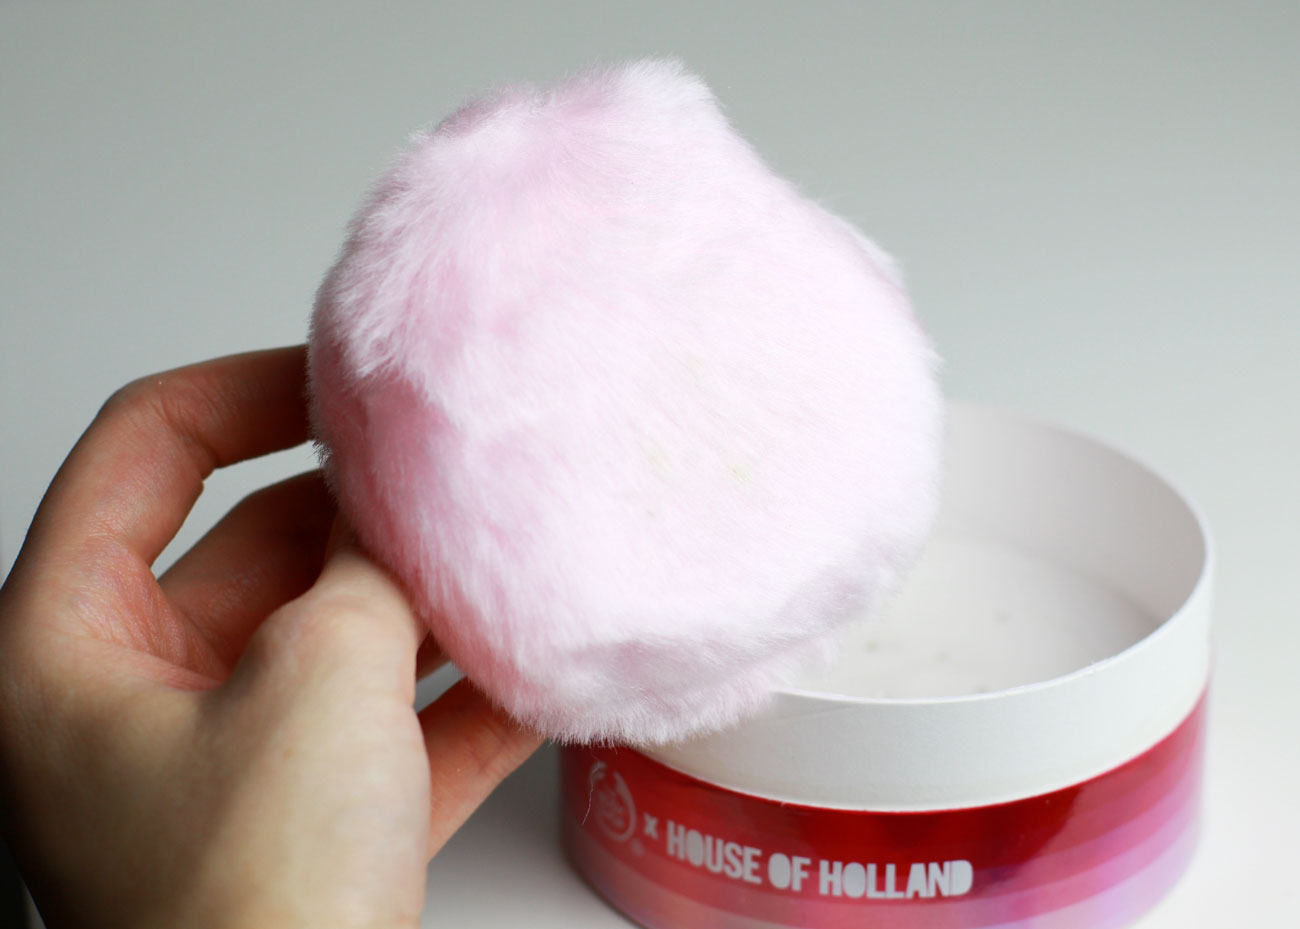 The Body Shop x House of Holland Shimmer Puff